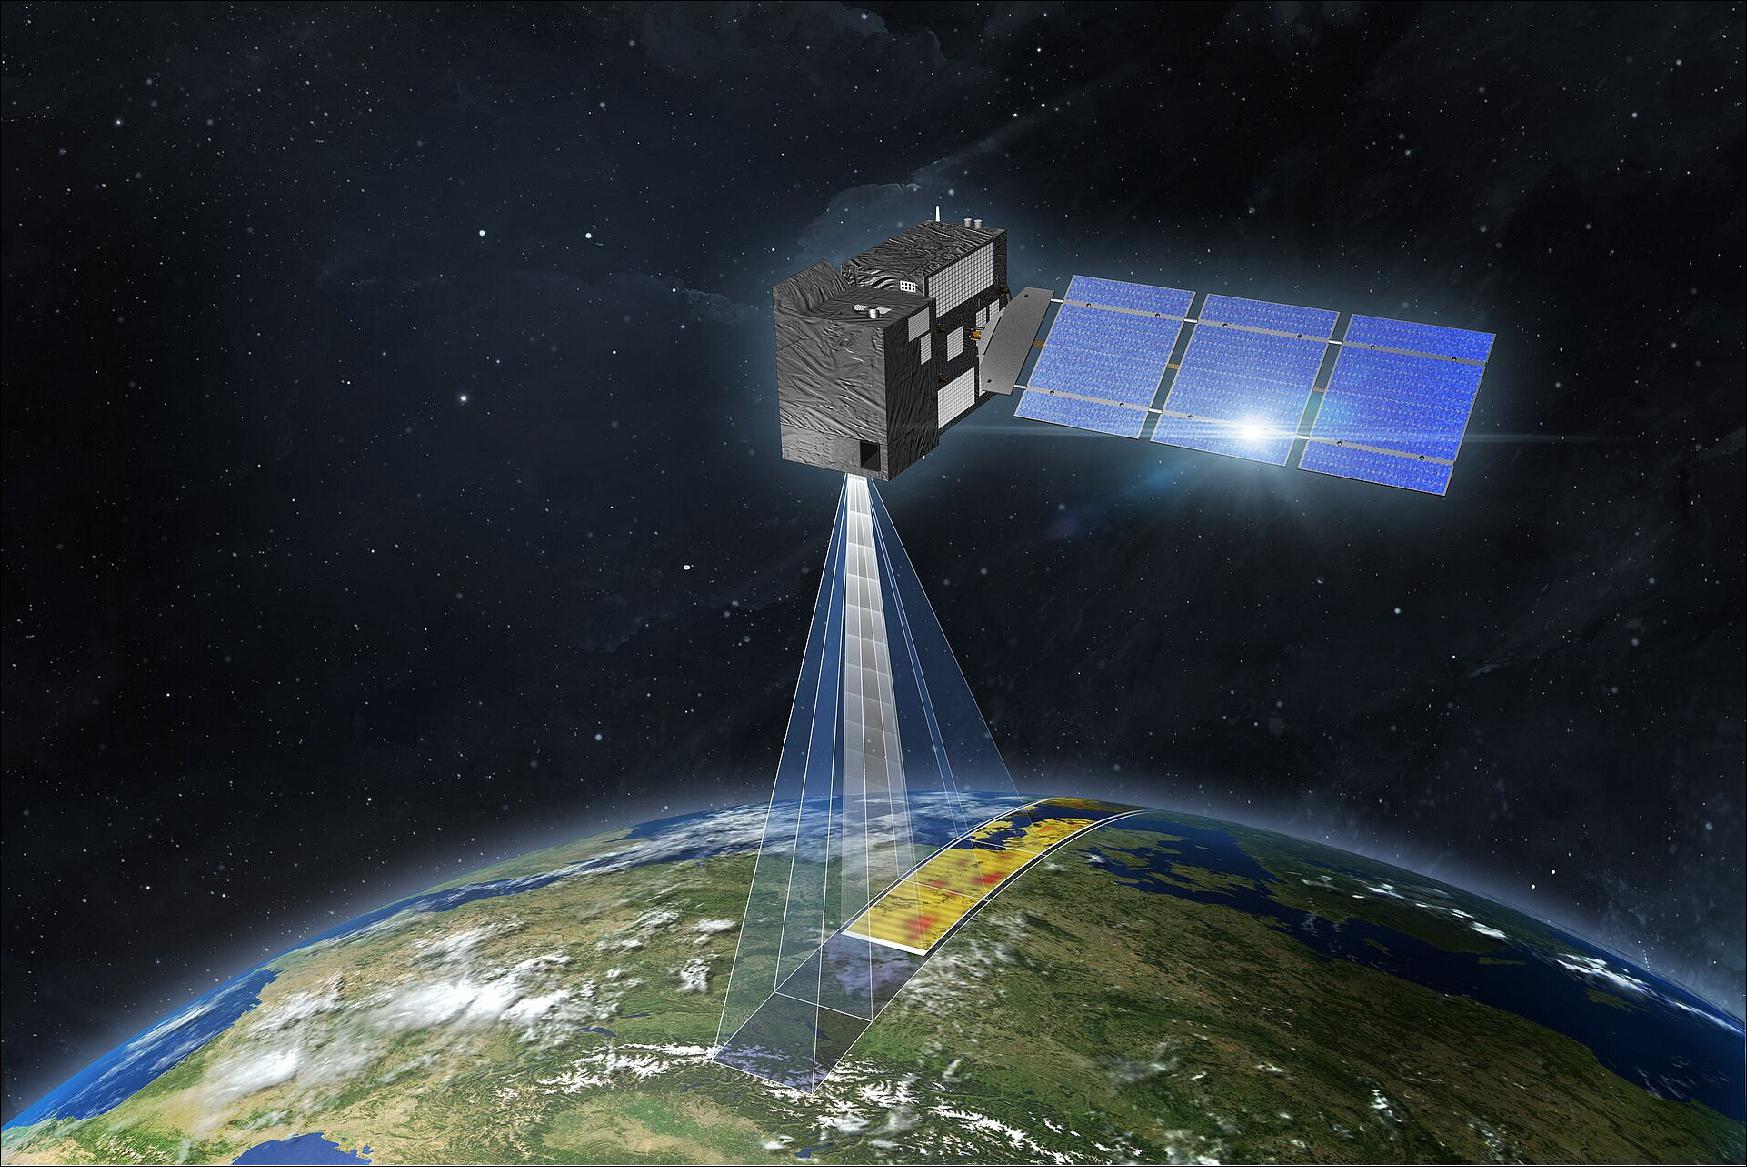 Figure 1: The Copernicus CO2M (Carbon Dioxide Monitoring) mission is one of Europe’s new high-priority satellite missions and will be the first to measure how much carbon dioxide is released into the atmosphere specifically through human activity (image credit: OHB)